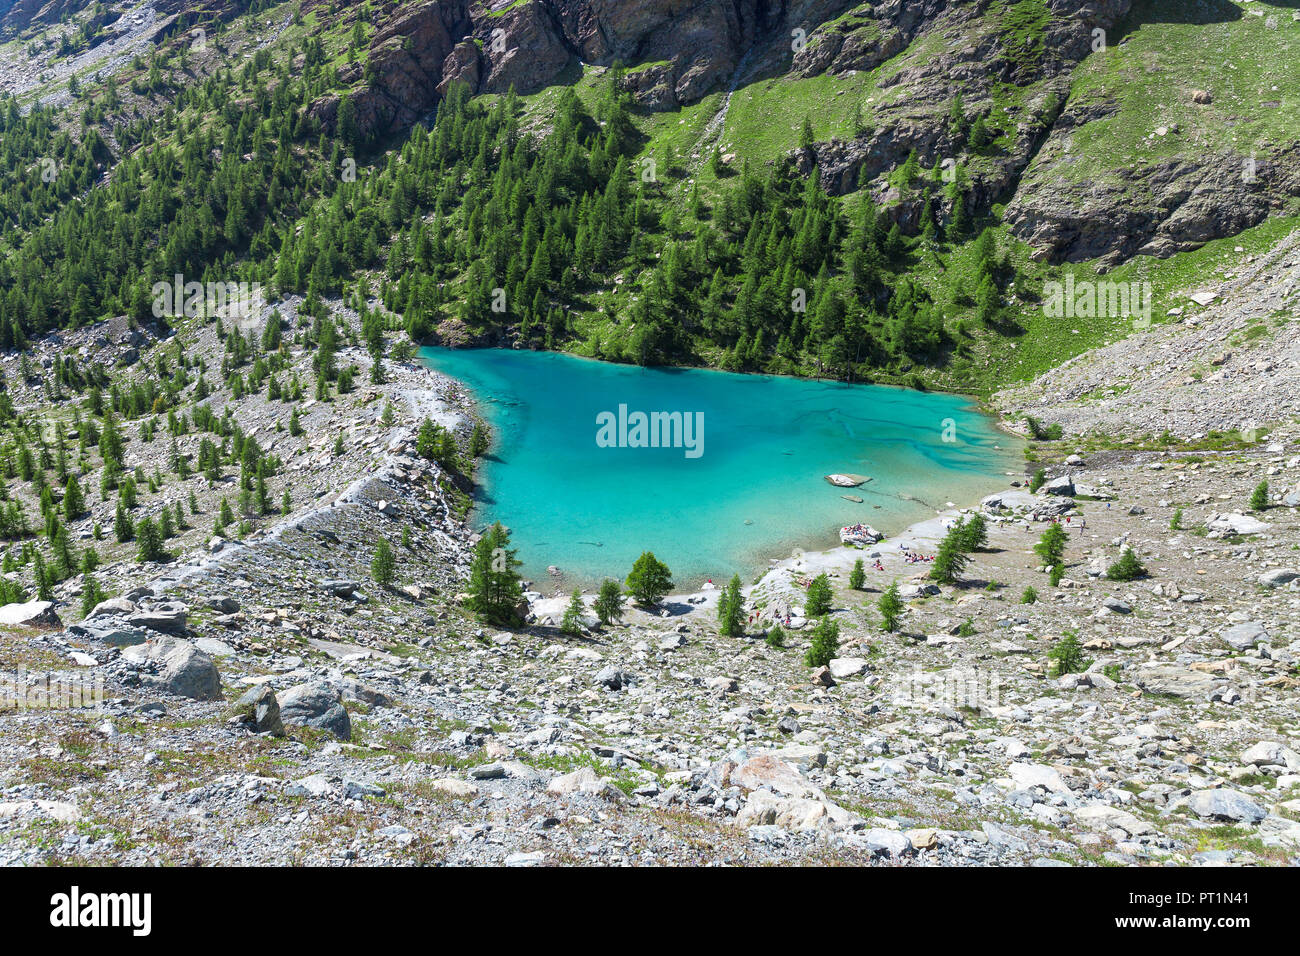 The green water of the Blu Lake at the foot of Monte Rosa Massif in Ayas Valley (Champoluc, Ayas Valley, Aosta province, Aosta Valley, Italy, Europe) Stock Photo